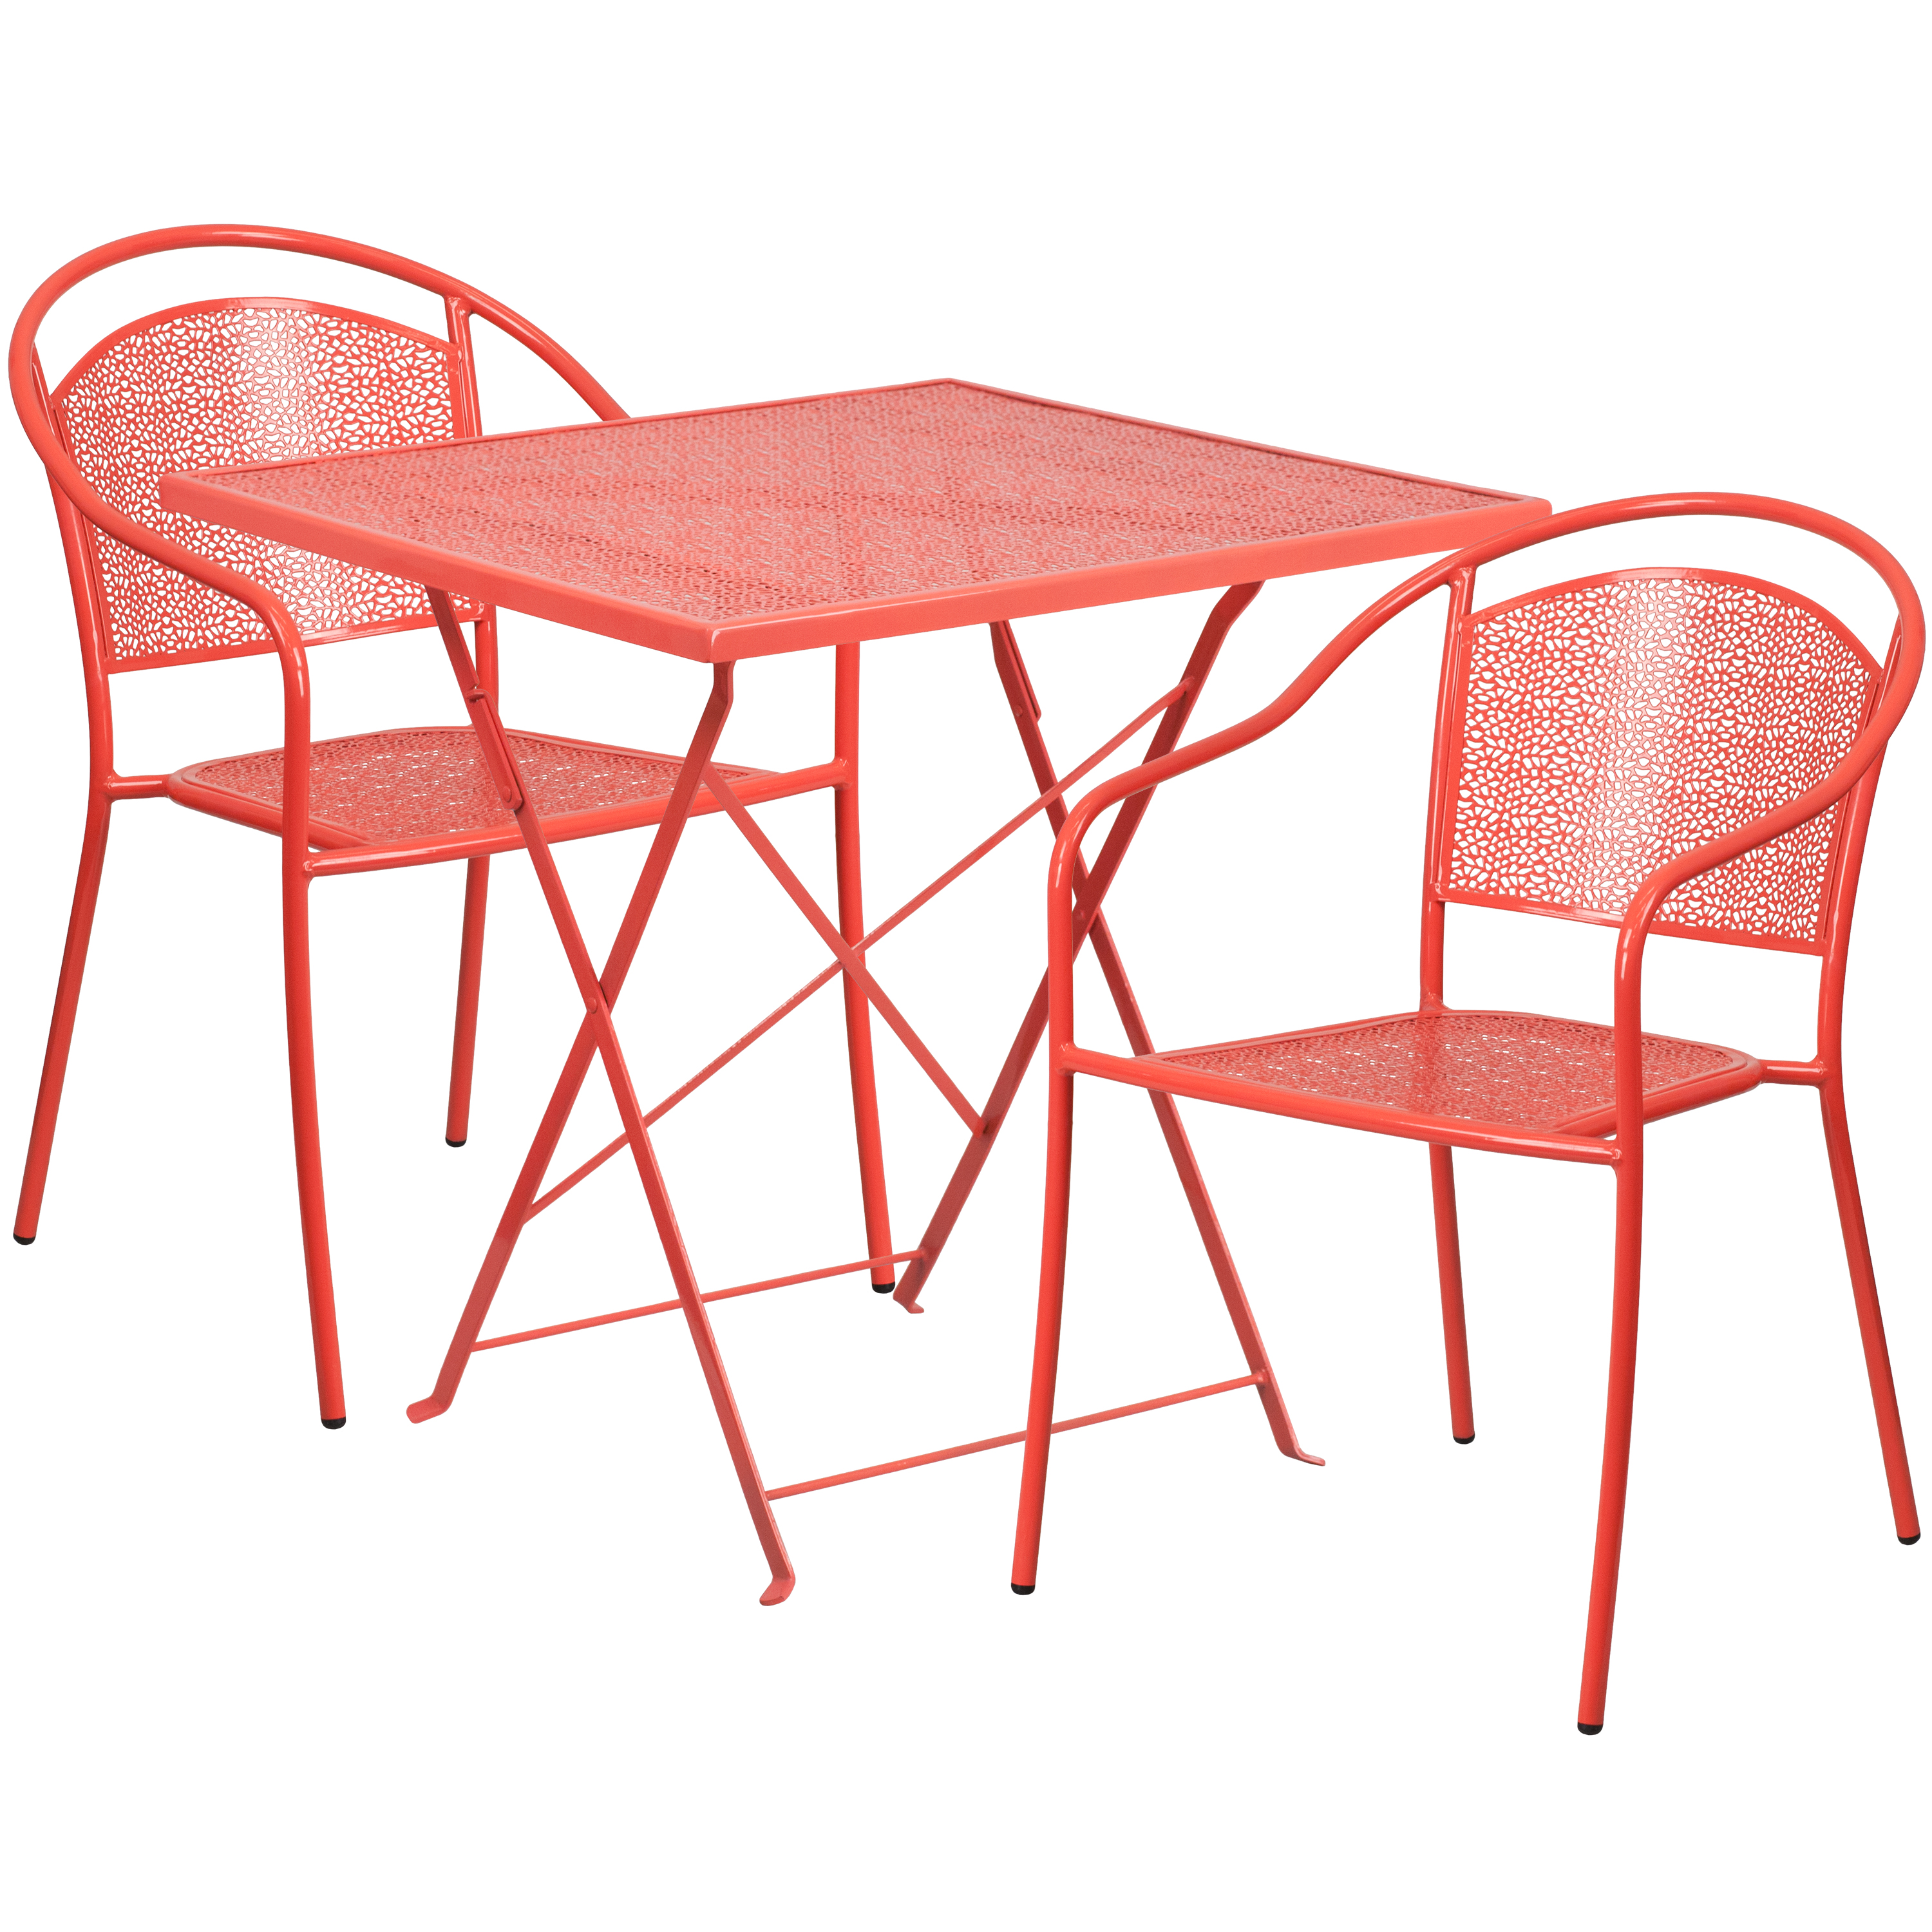 Flash Furniture CO-28SQF-03CHR2-RED-GG 28" Square Coral Indoor/Outdoor Steel Folding Patio Table Set with 2 Round Back Chairs